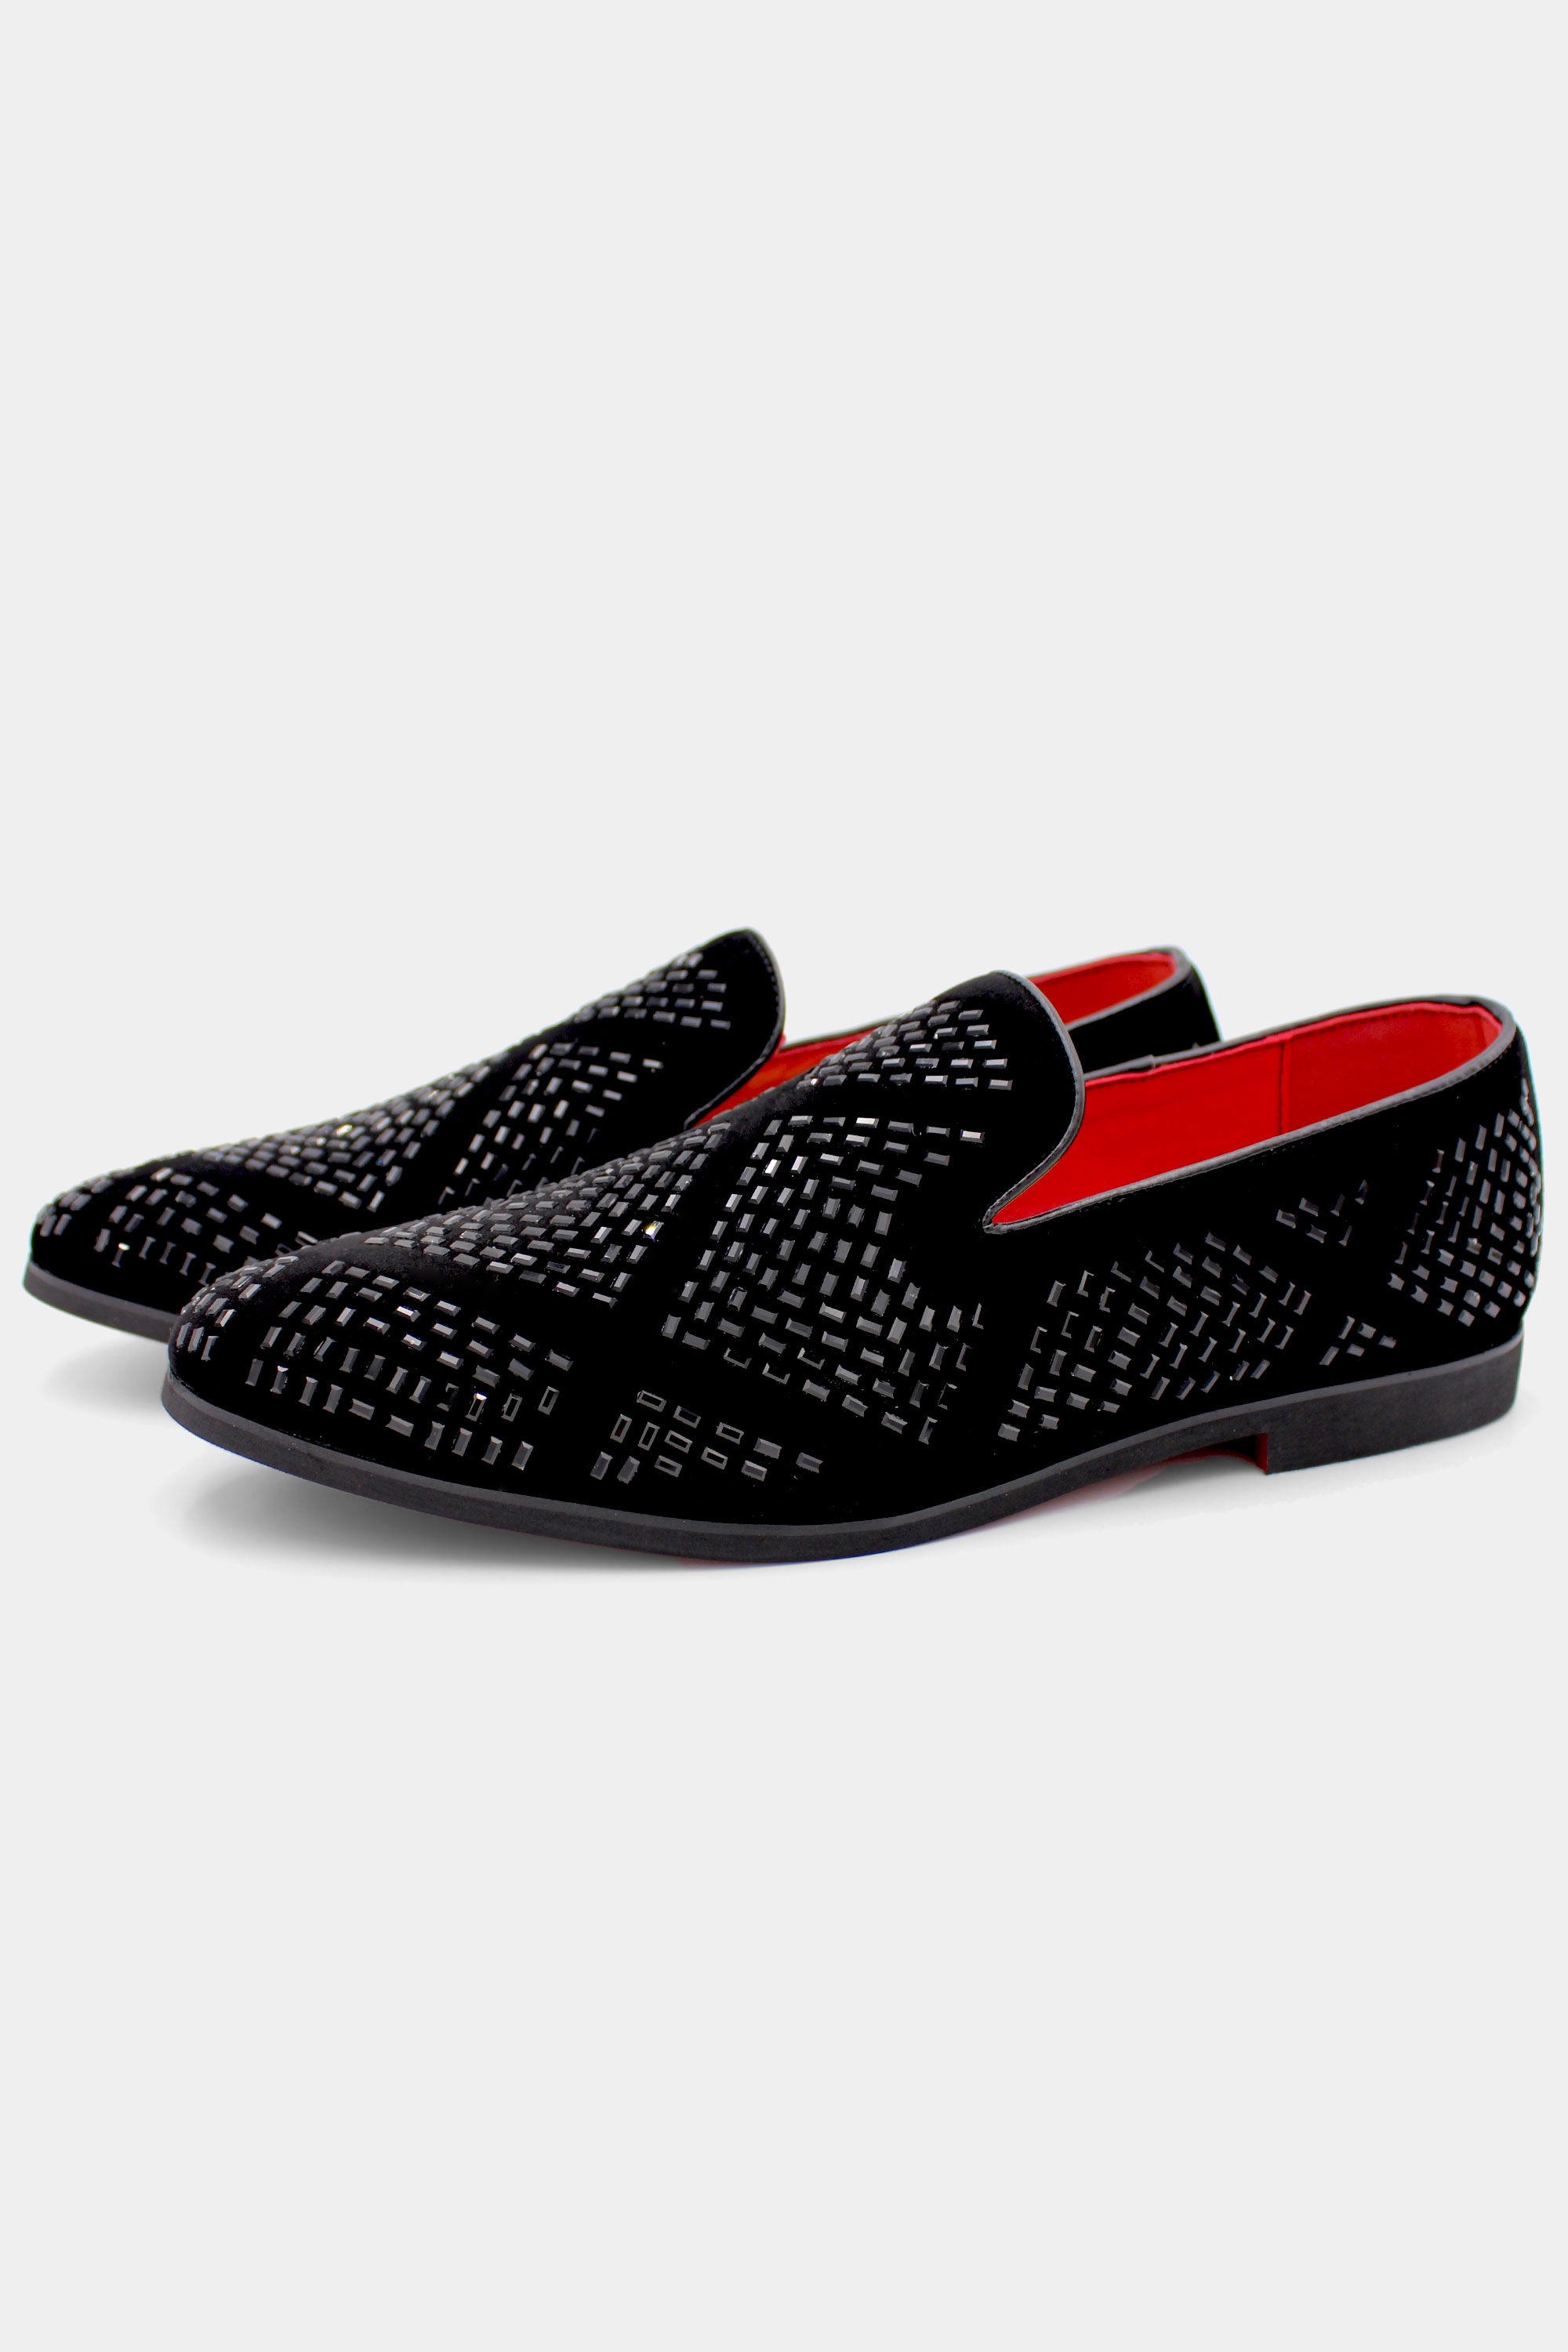 Rhinestone Loafers Mens | vlr.eng.br